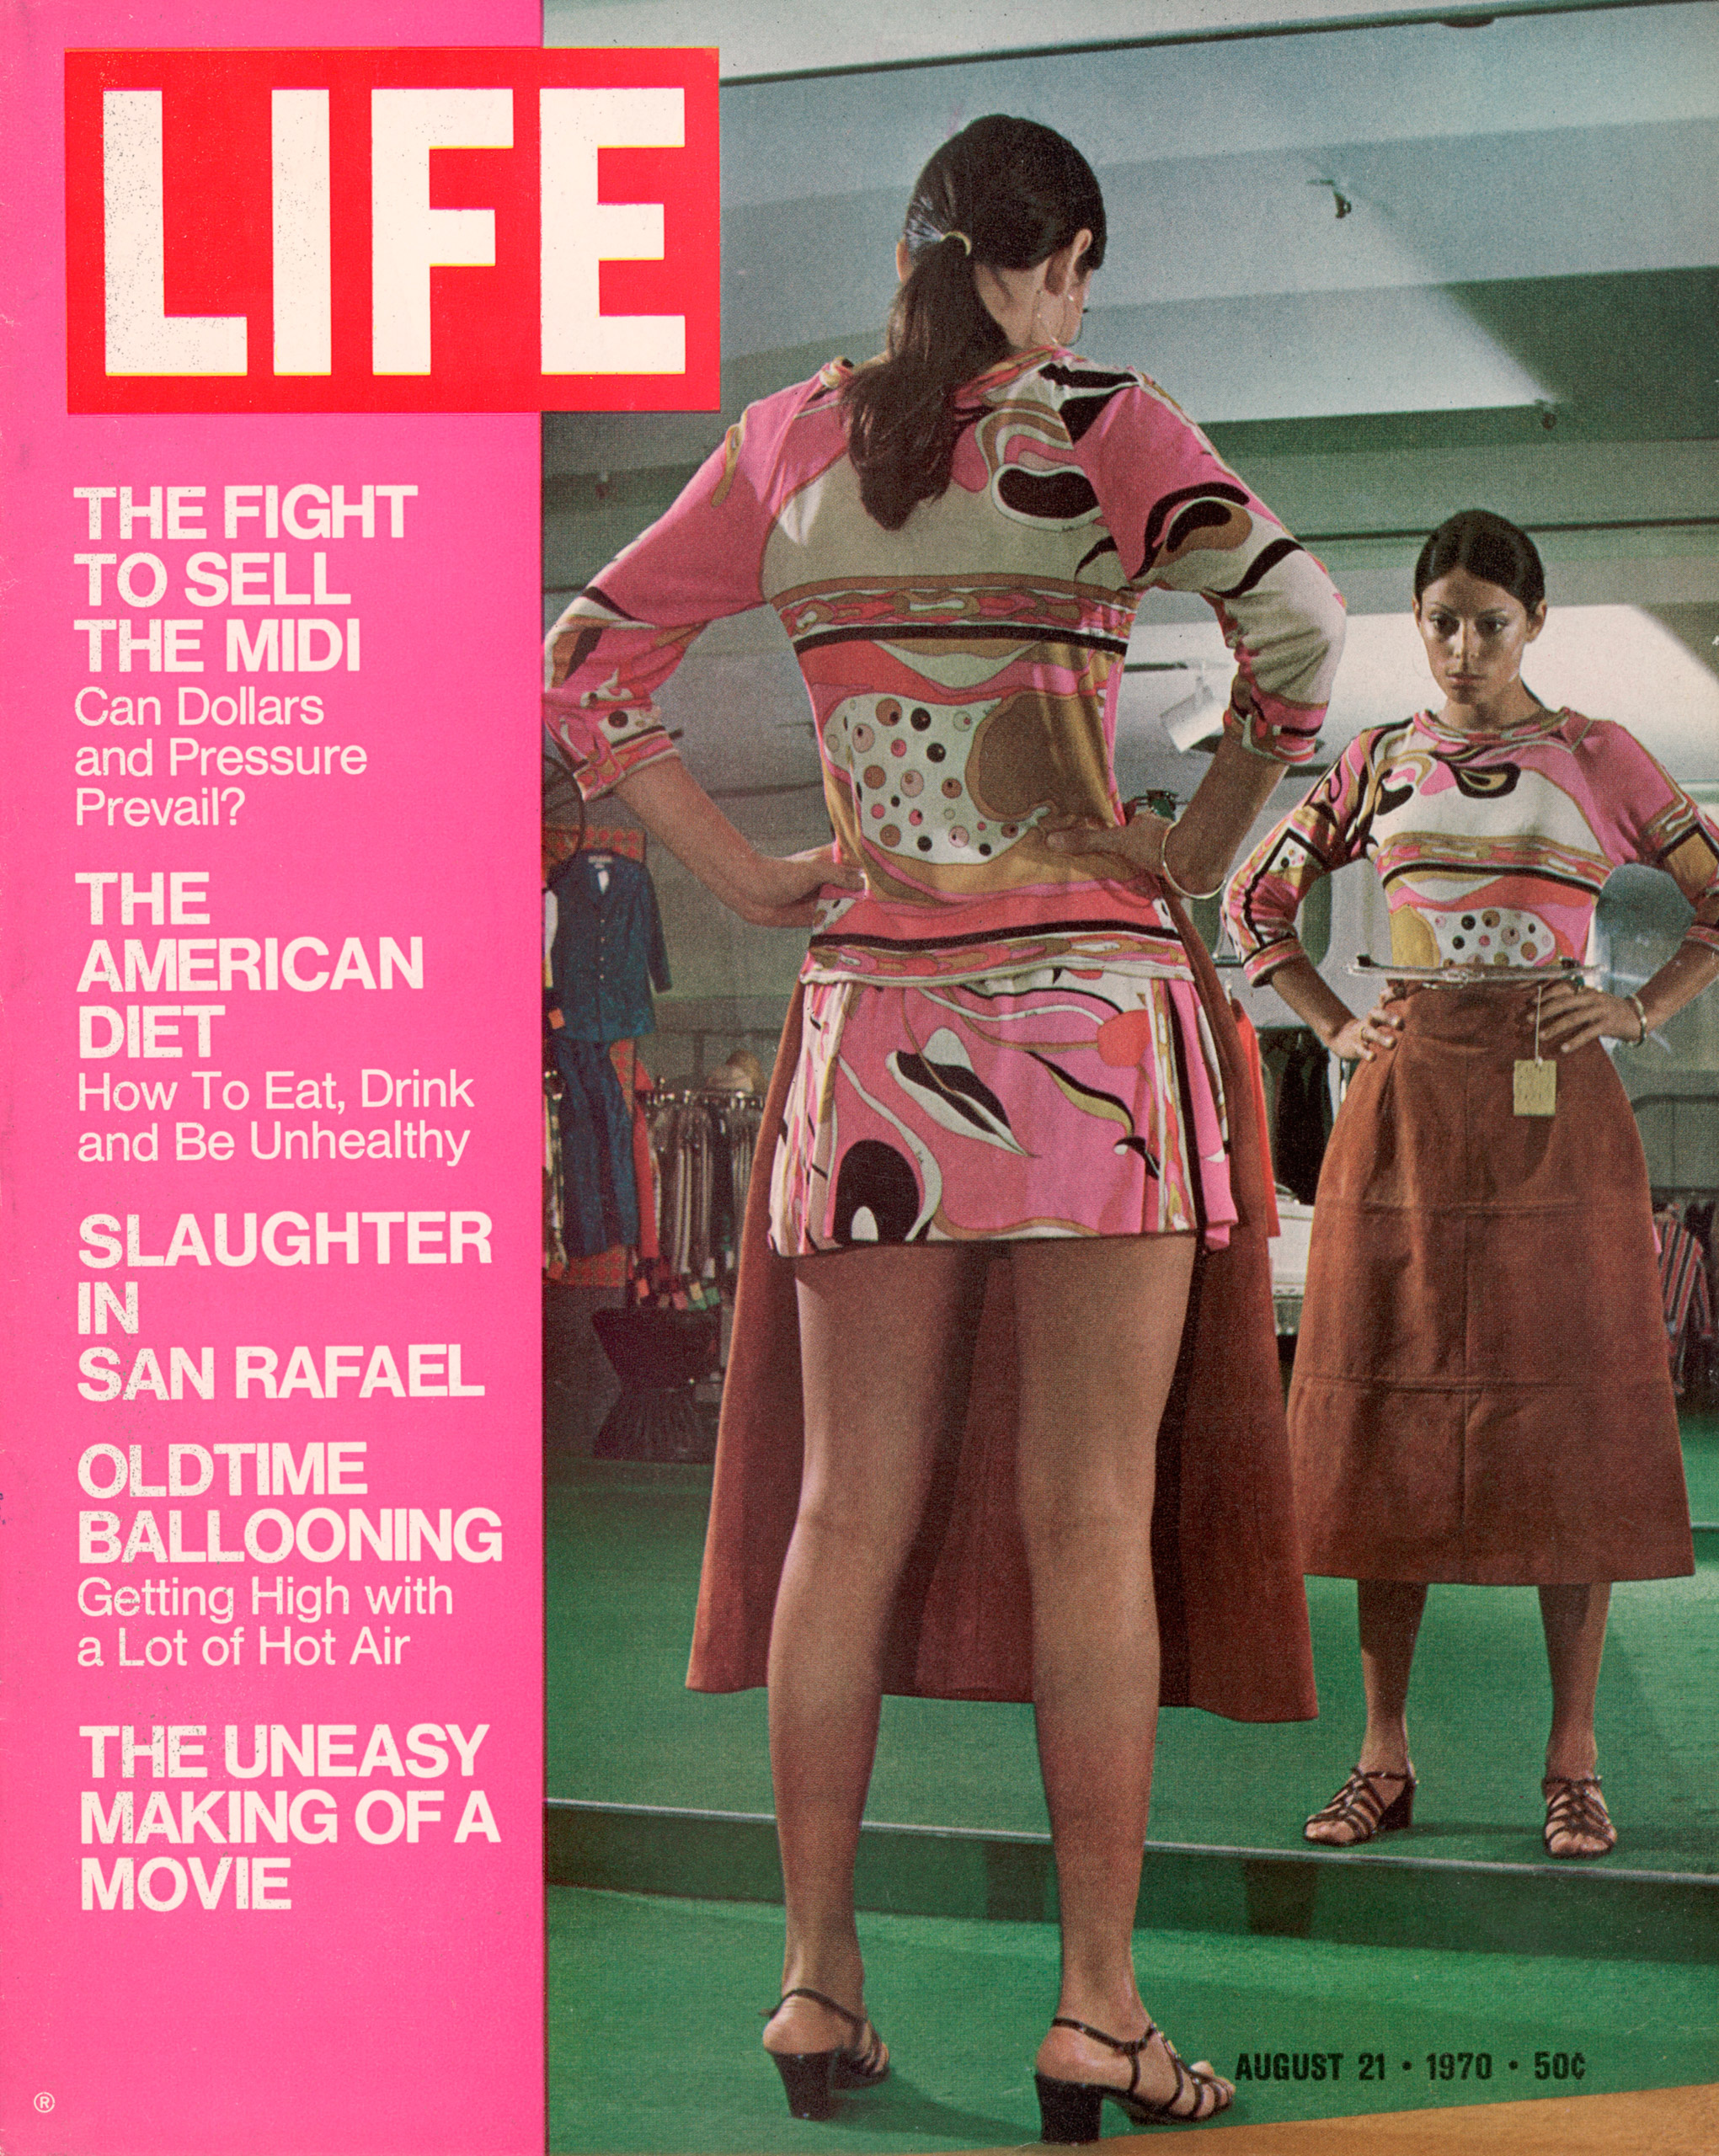 August 21, 1970 cover of LIFE magazine.